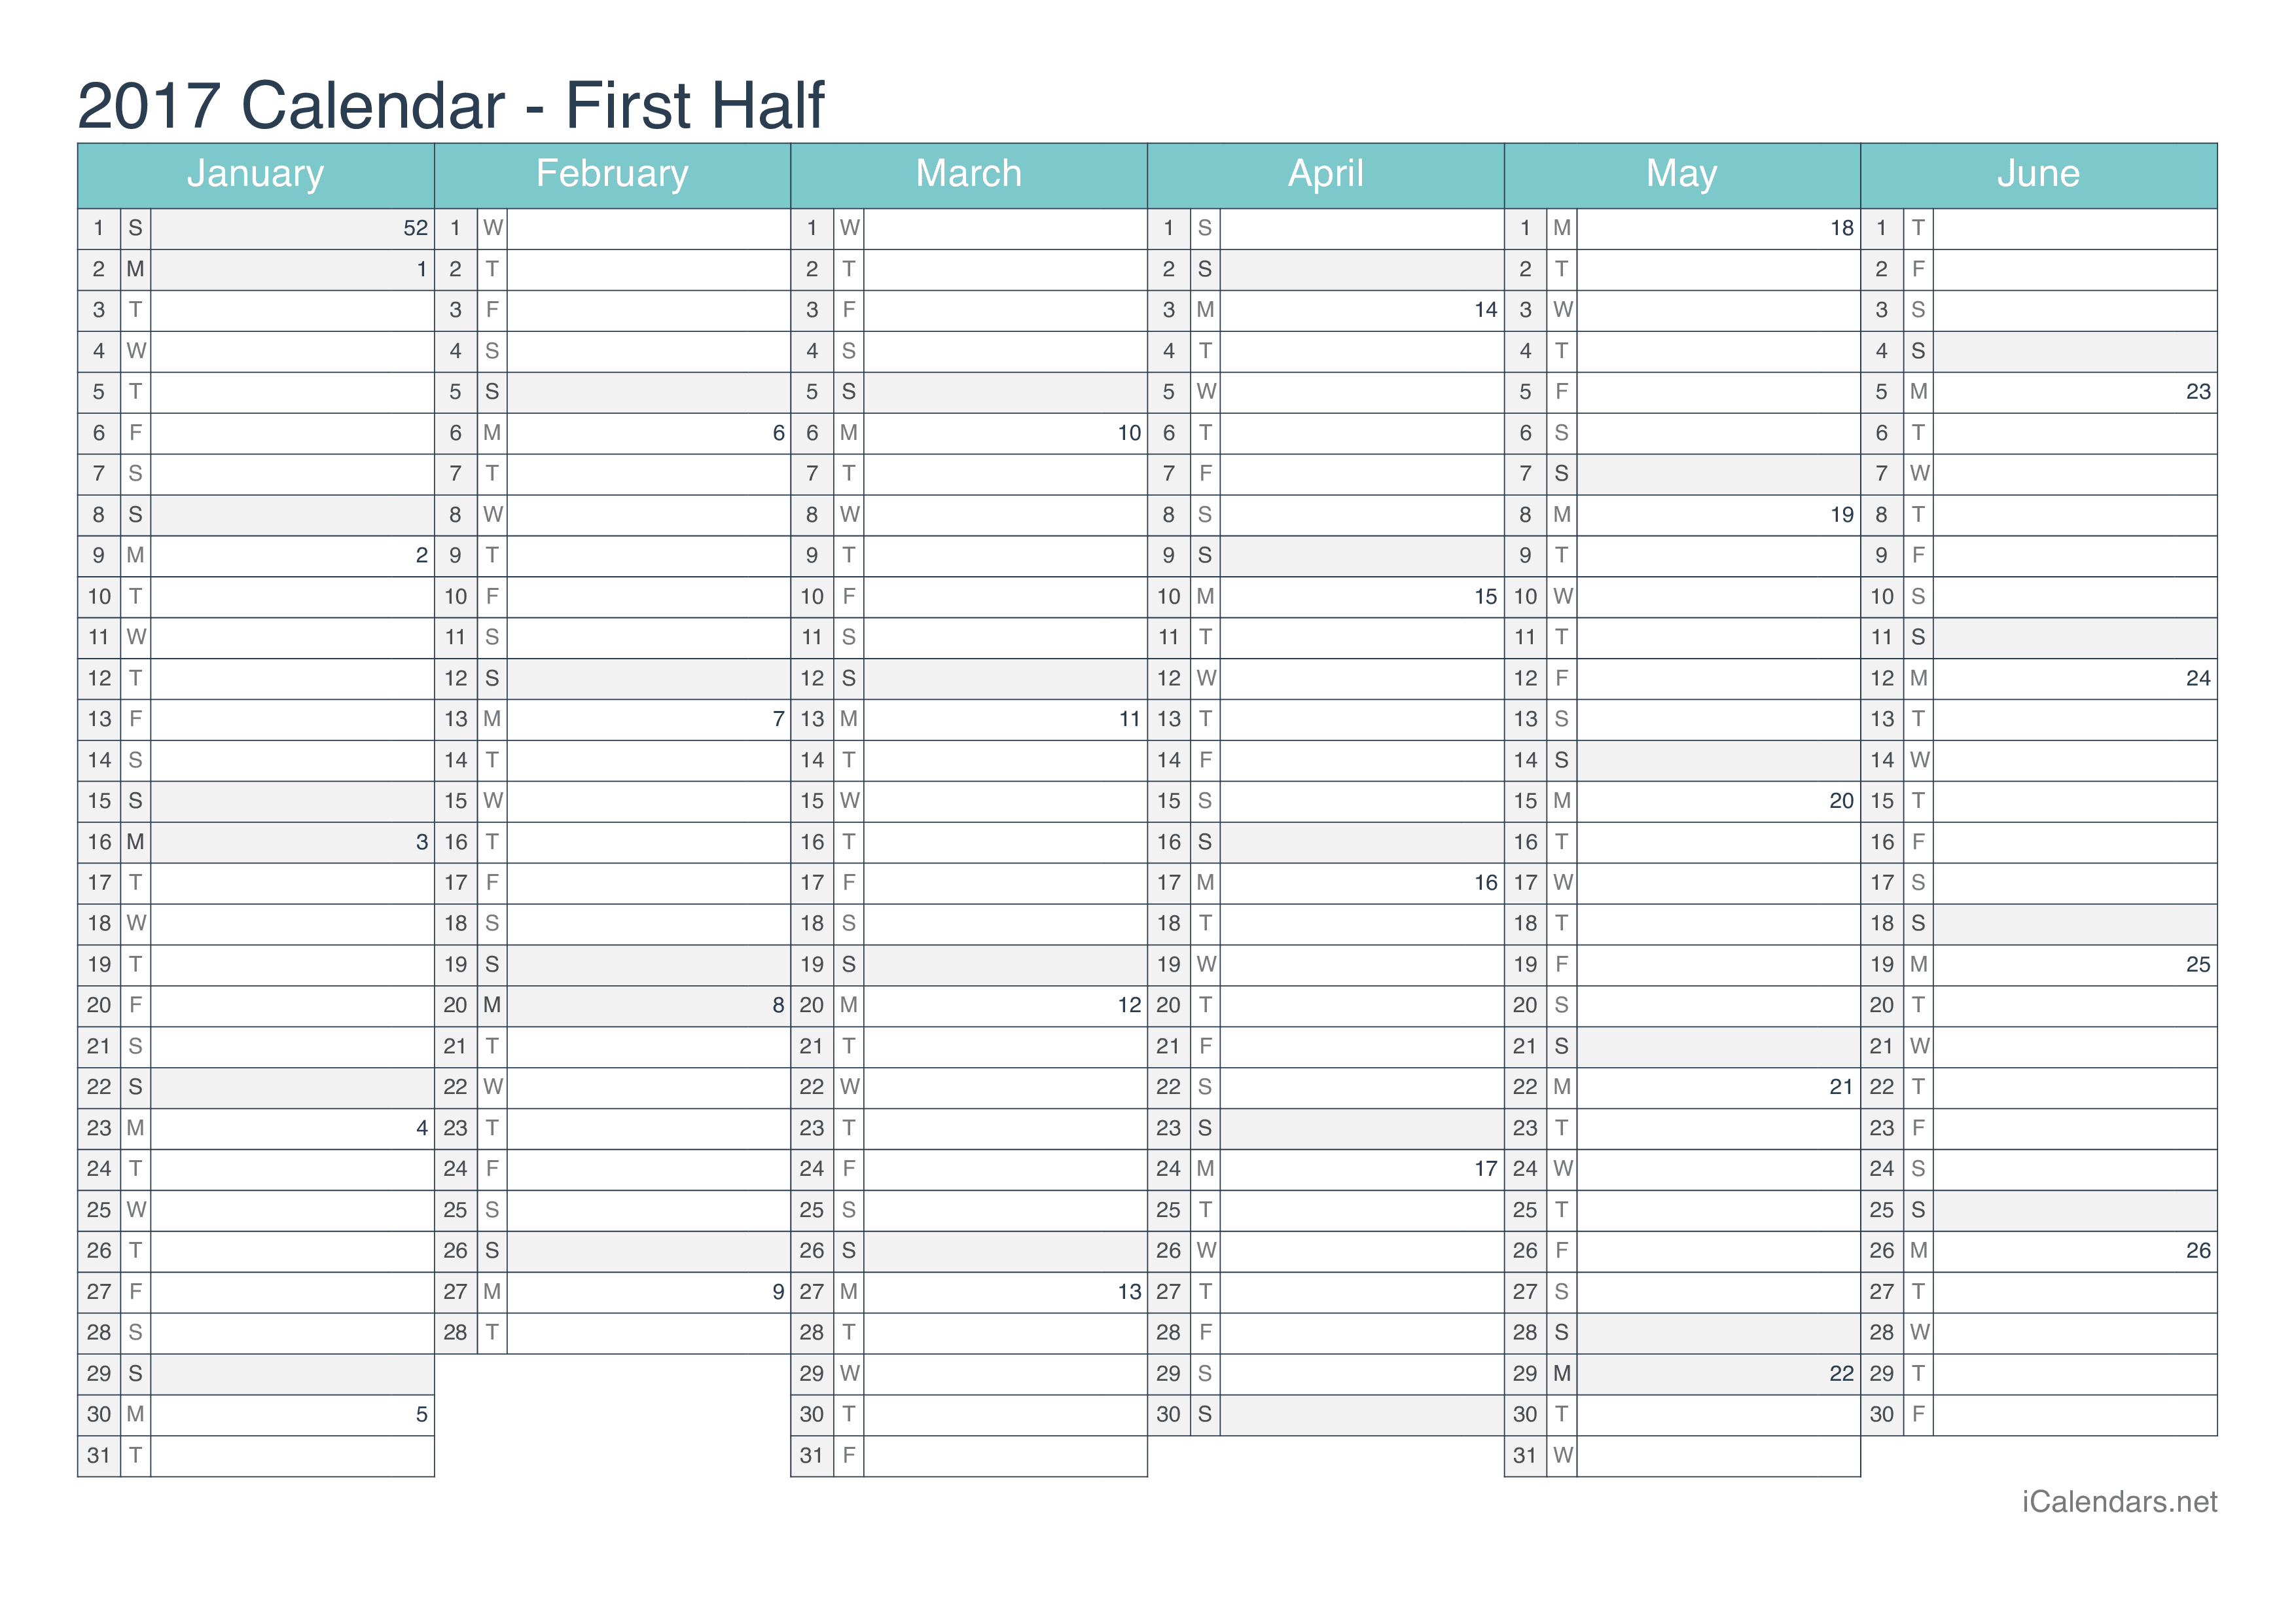 2017 Half year calendar with week numbers - Turquoise